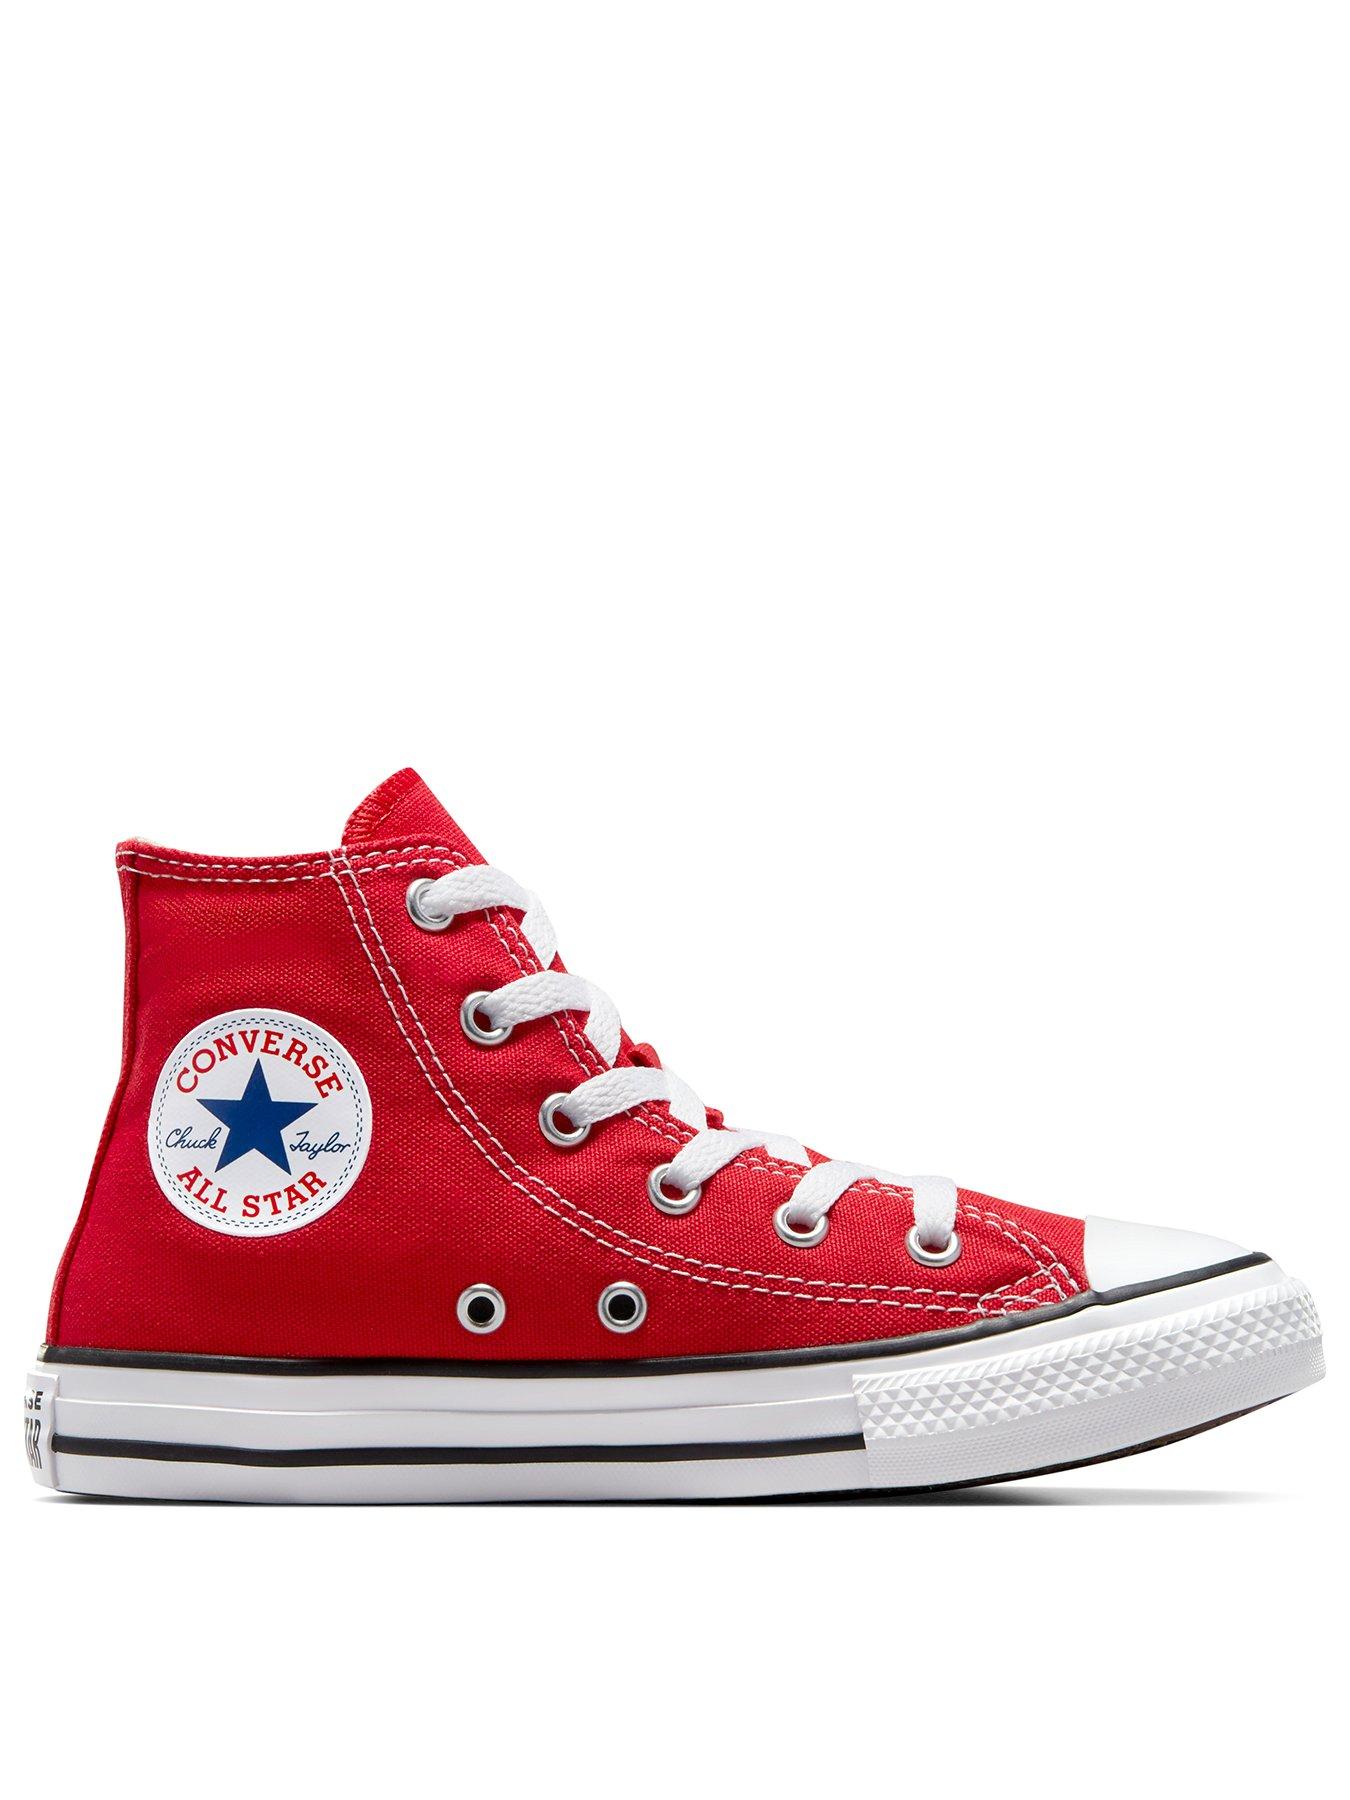 converse all star size 1